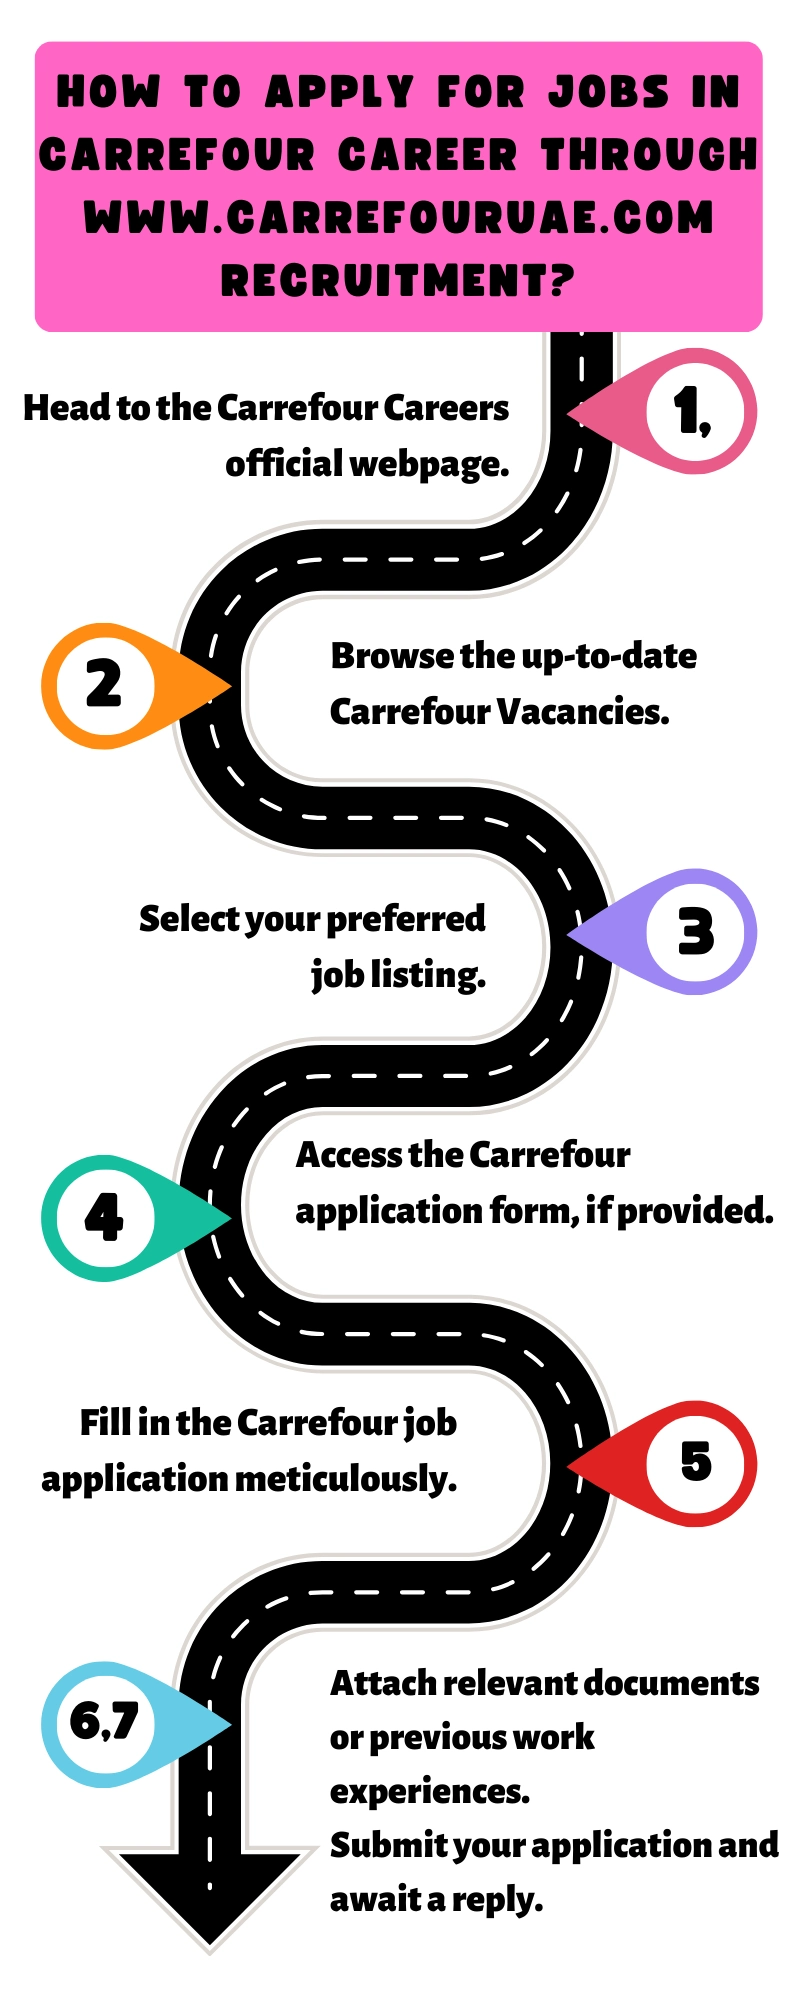 How to Apply for Jobs in Carrefour Career through www.carrefouruae.com recruitment?